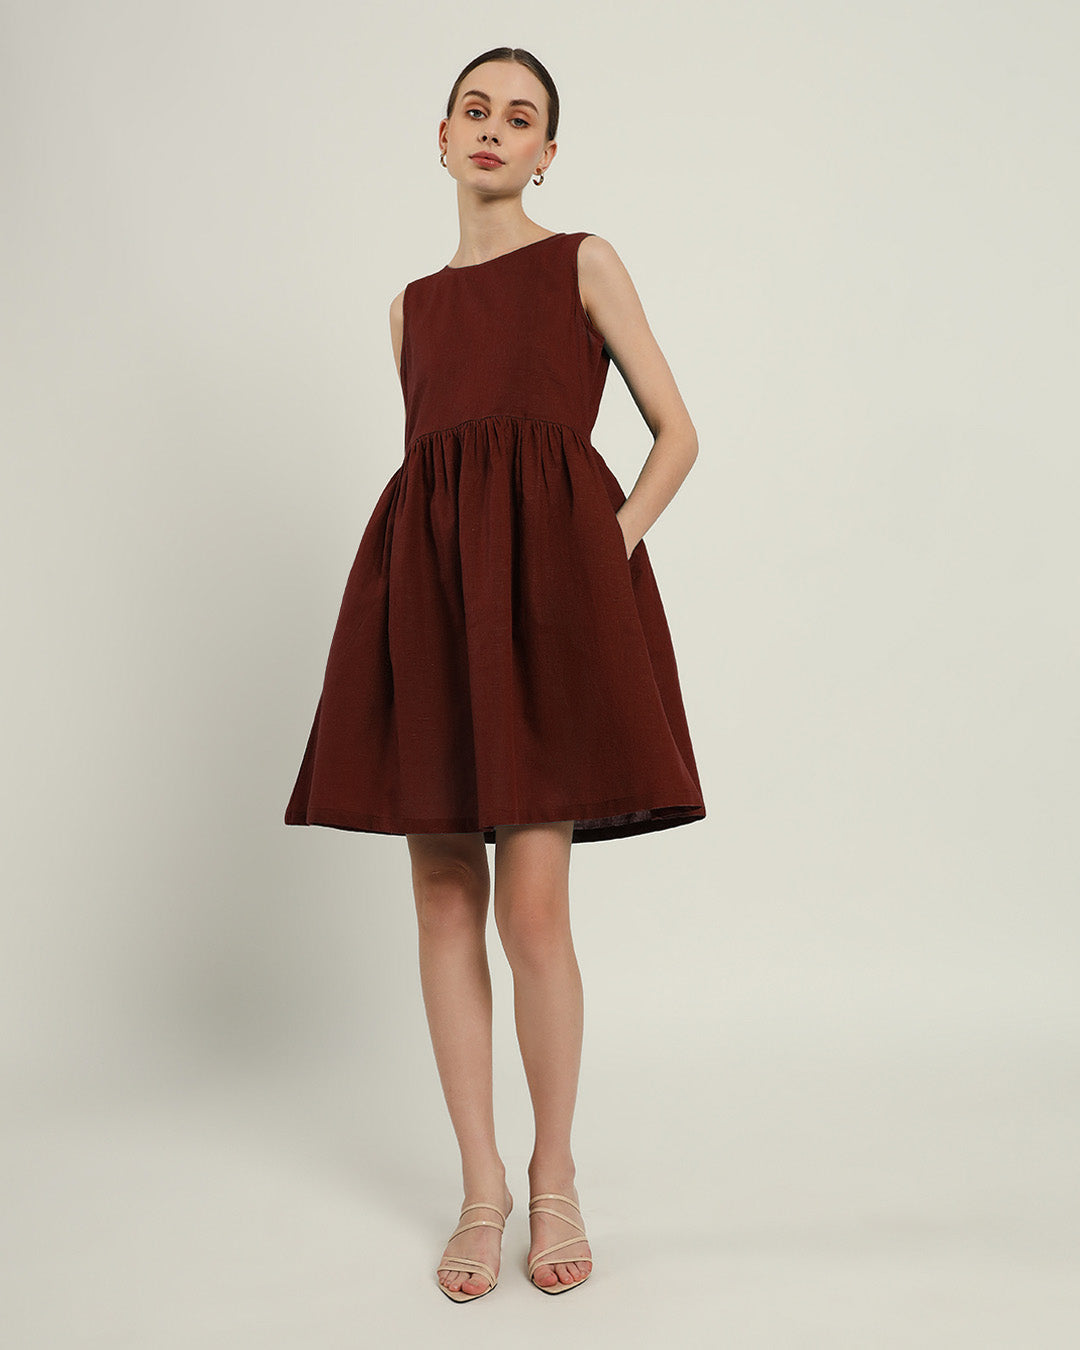 The Chania Rouge Dress